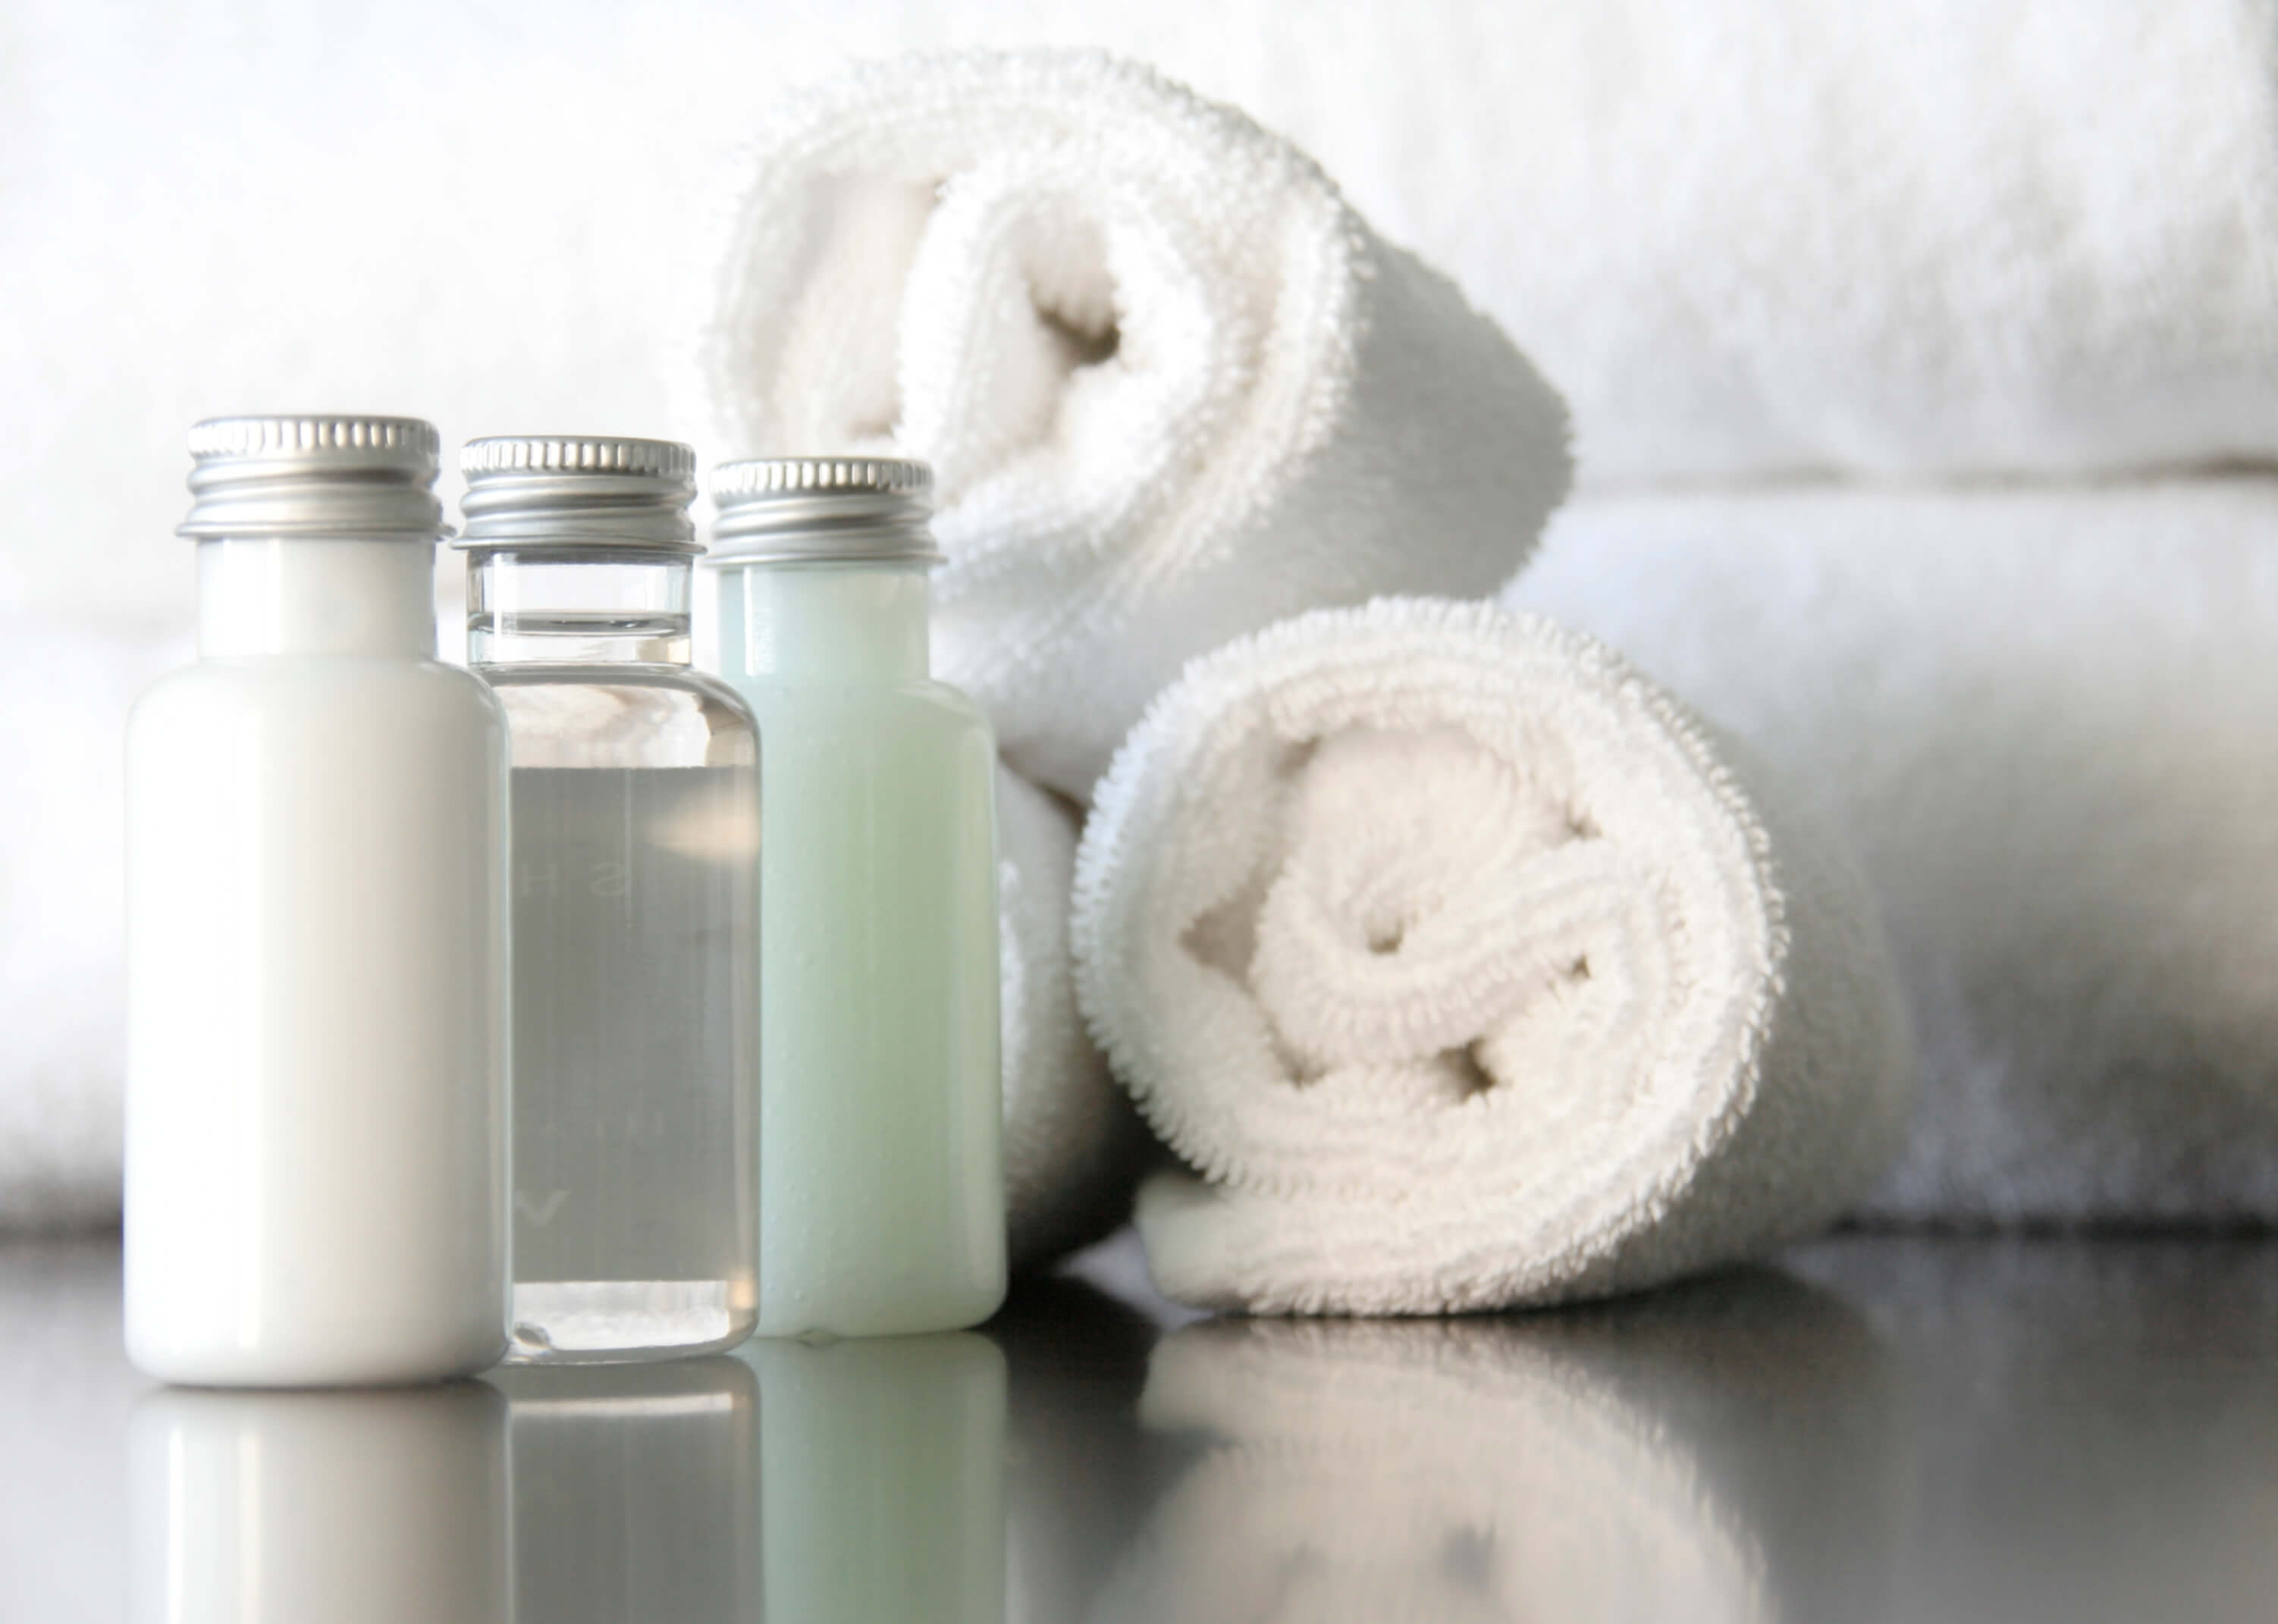 Close up of three bottles containing cosmetics against a background of rolled up white fluffy towels